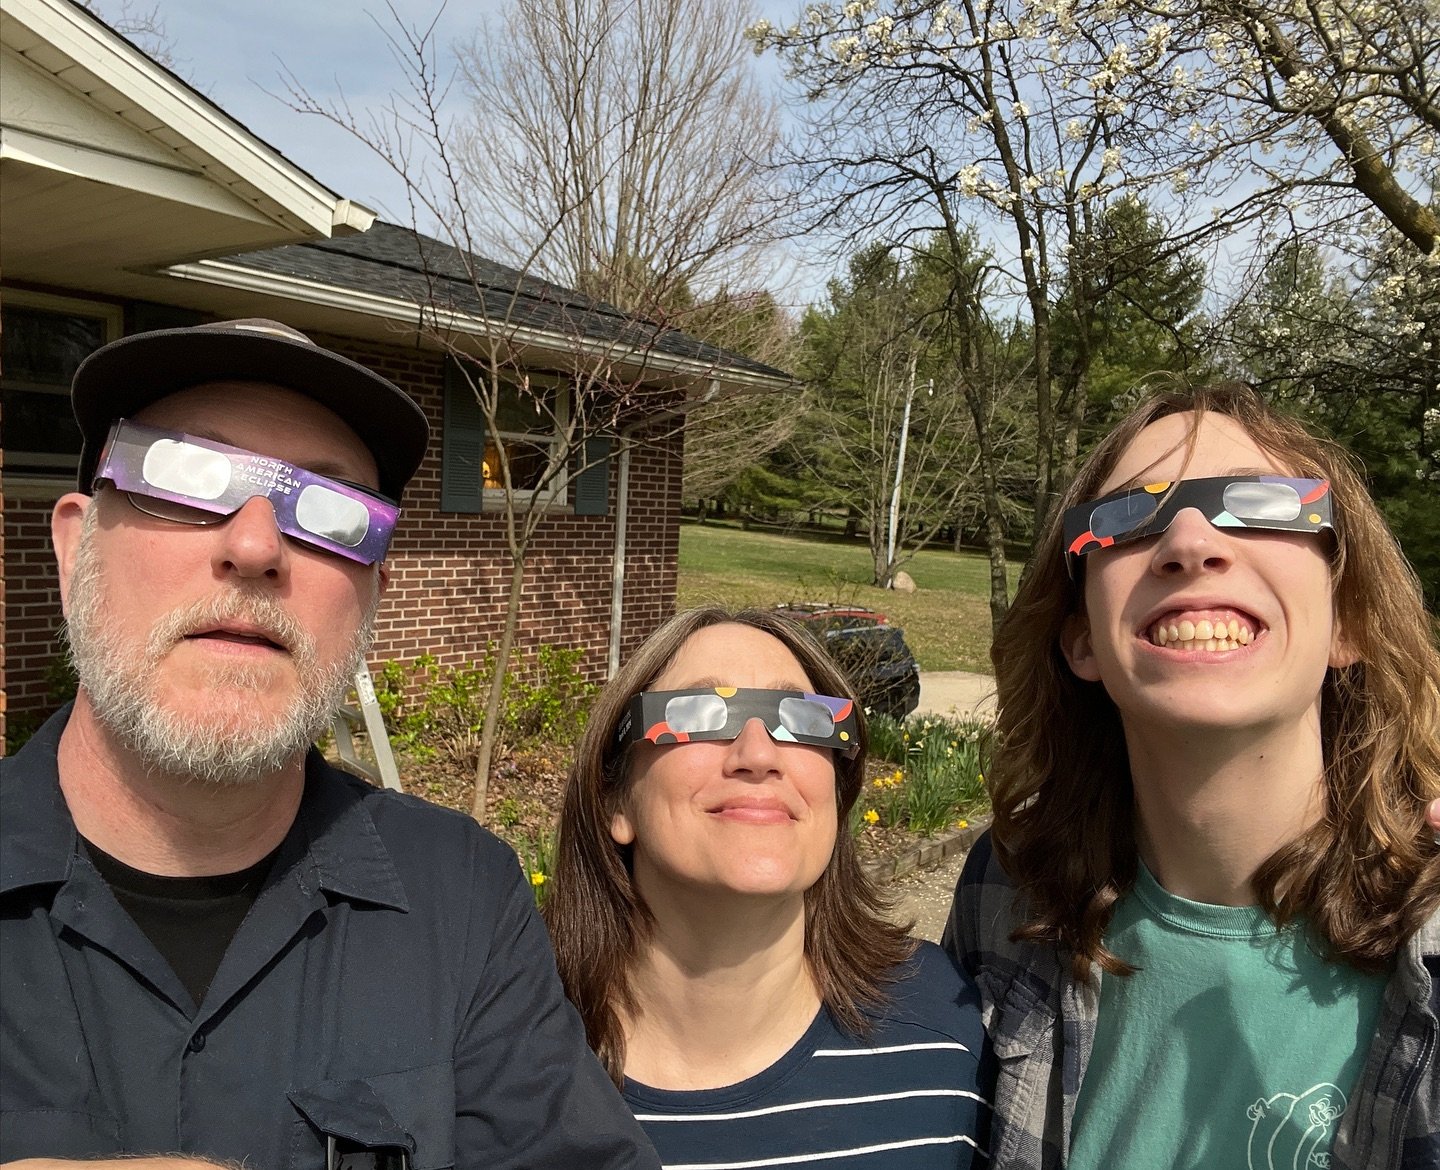 Watching the eclipse with these goofballs!